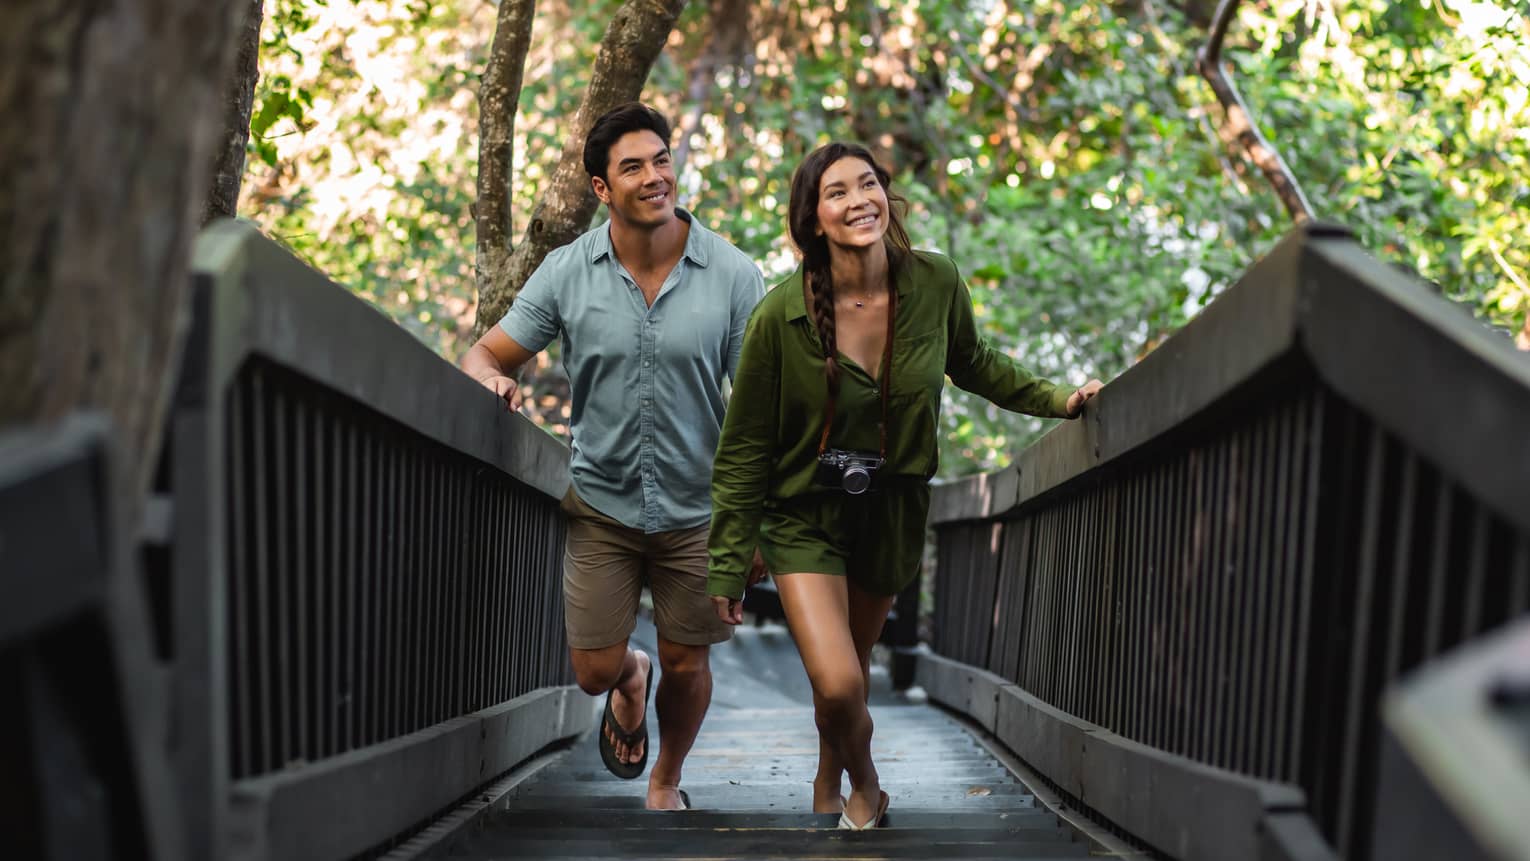 A man and a woman walk up a wooden walkway surrounded by trees